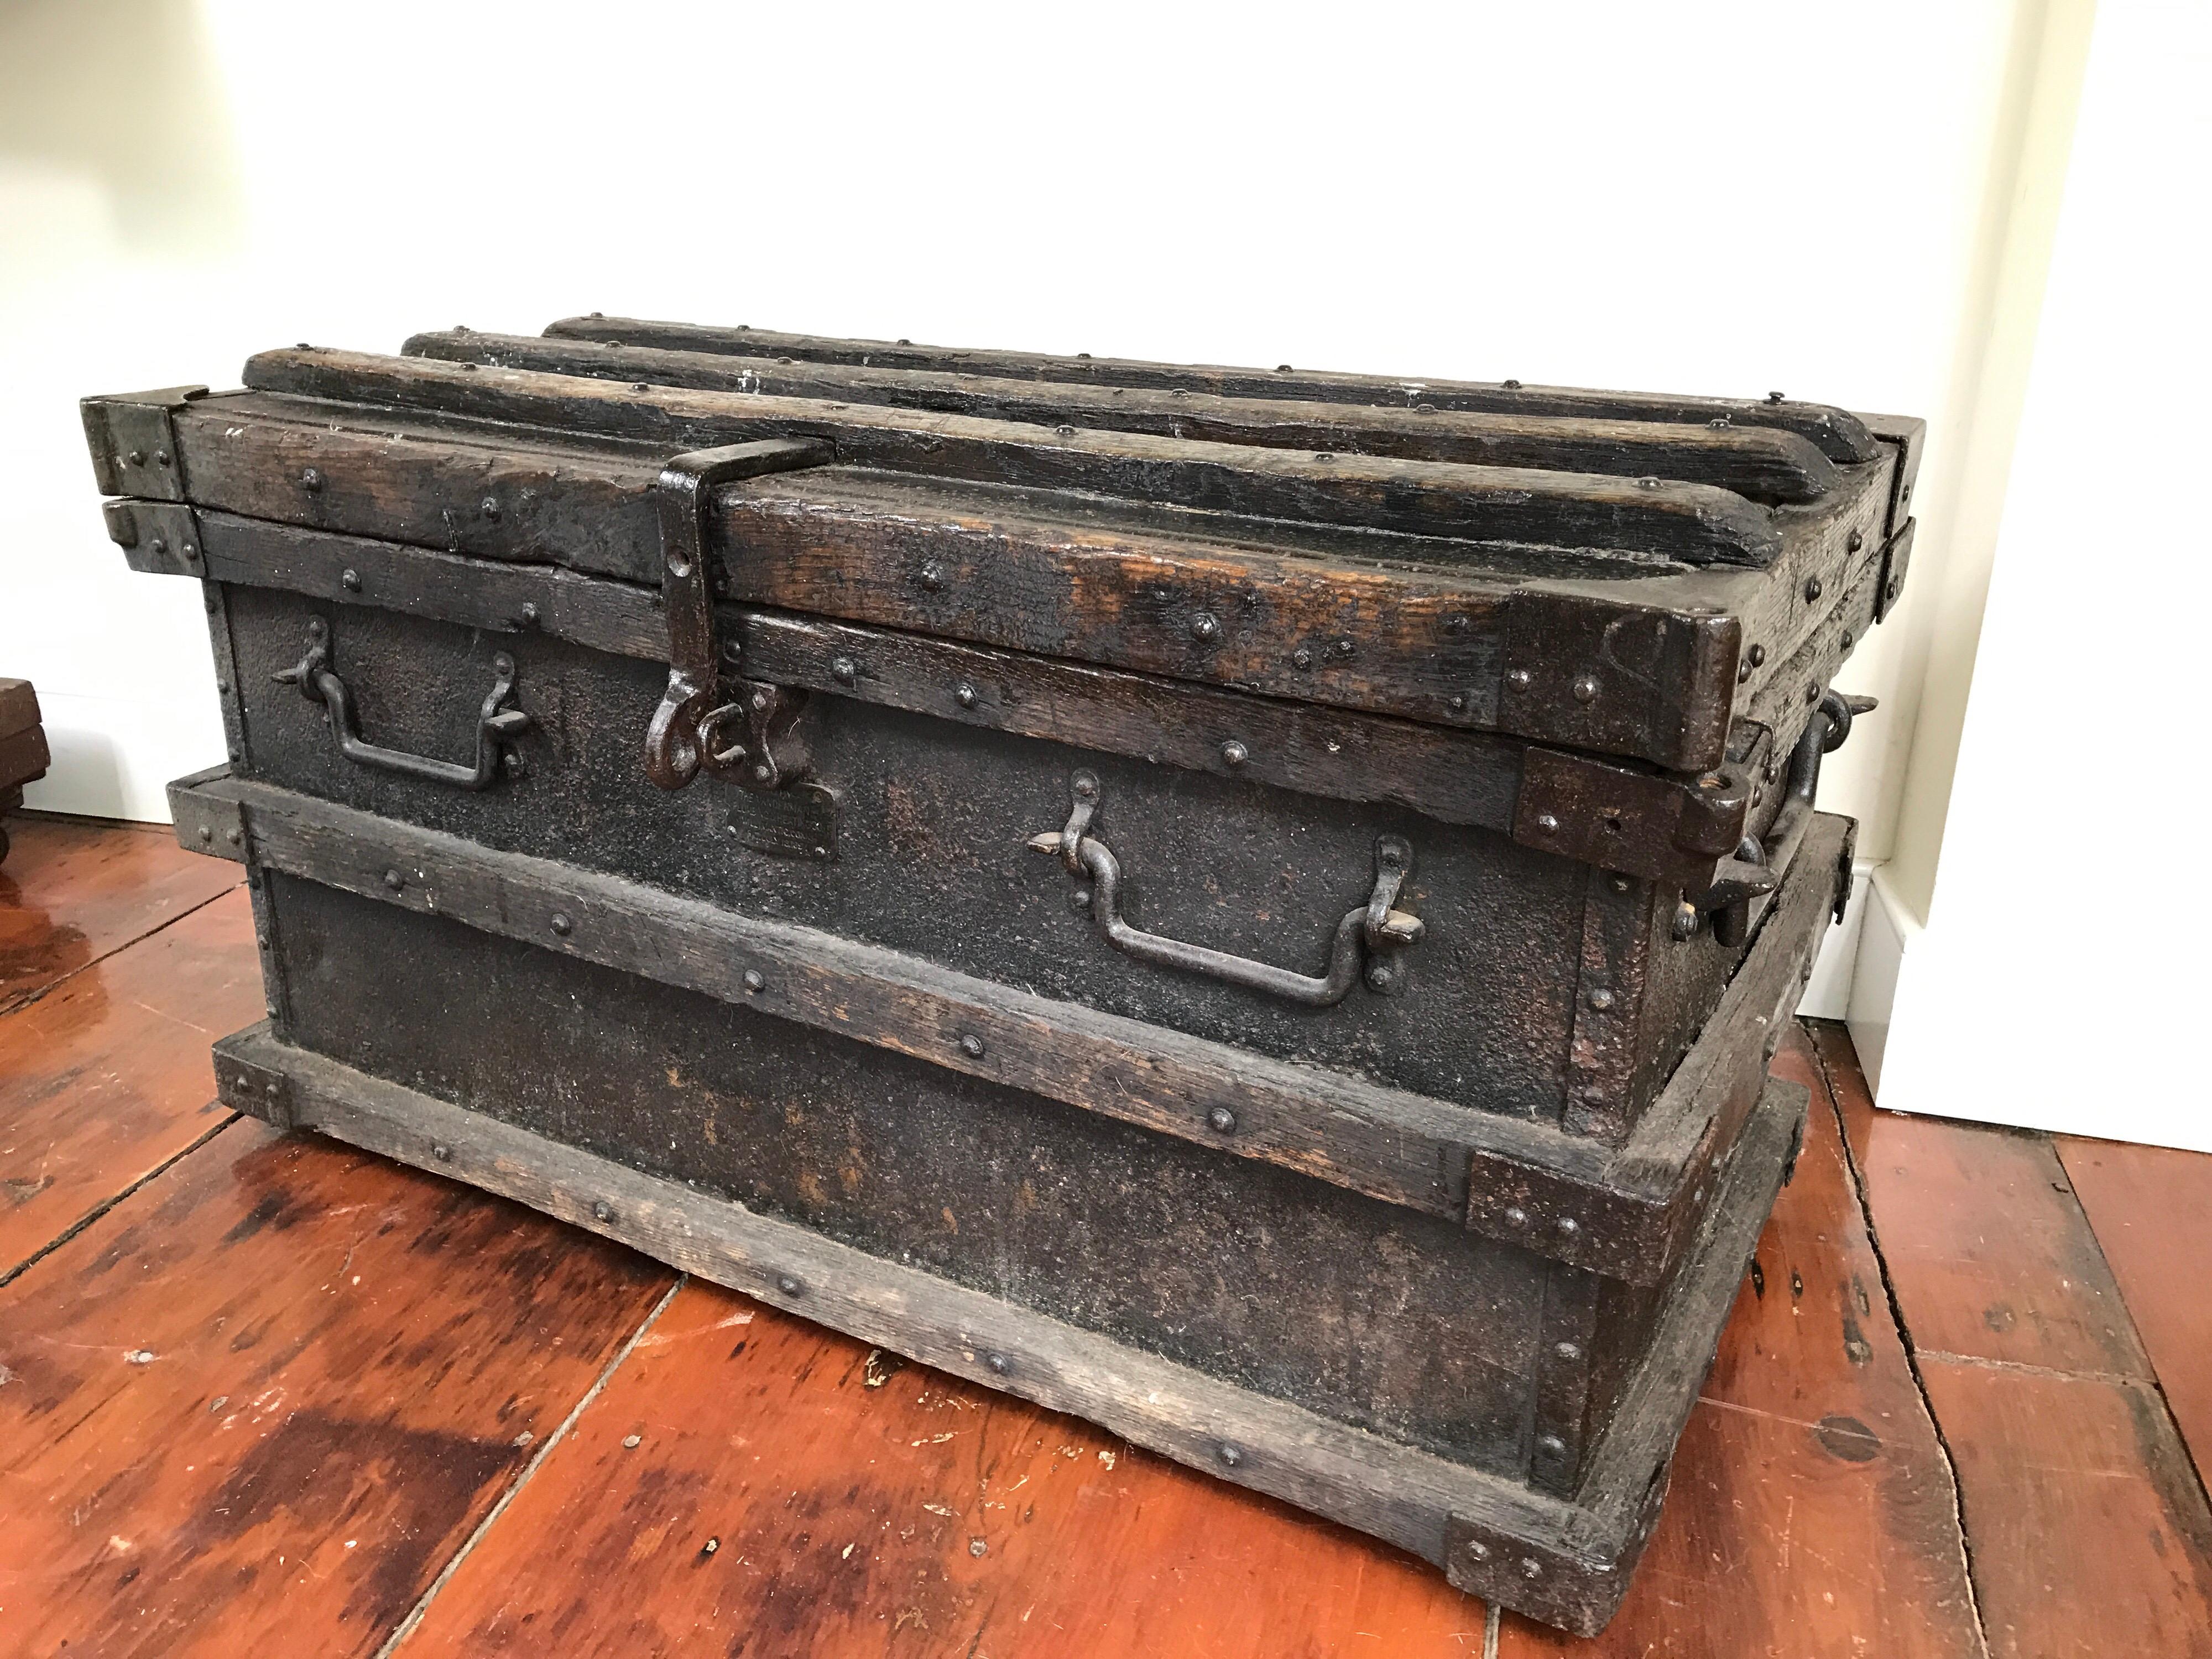 A 19th century iron and wood chest by Vanderman. Made in USA. Iron and wood body with handwrought handles and lock.